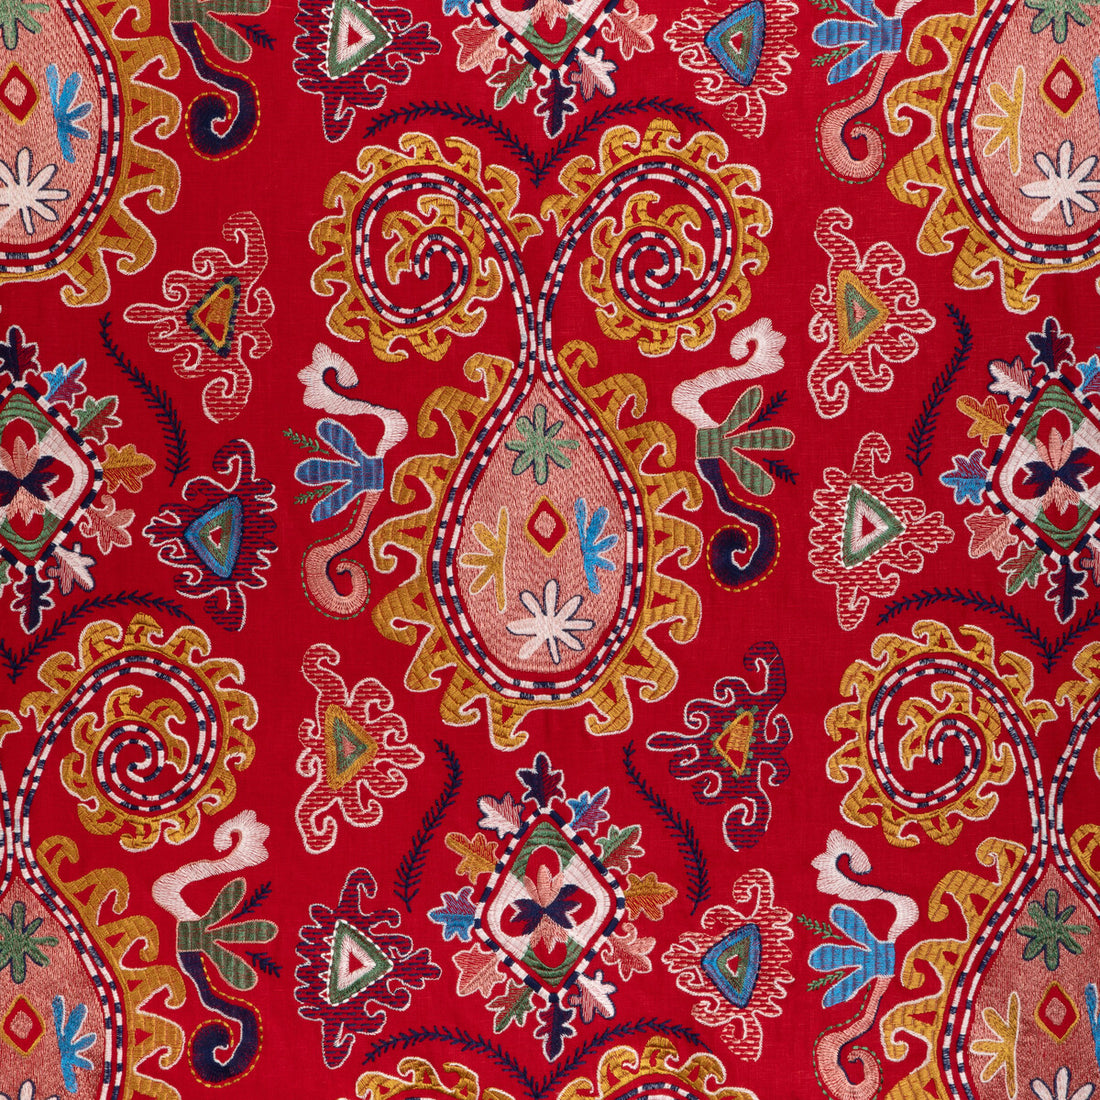 Lavali Emb fabric in red/gold color - pattern 8023117.194.0 - by Brunschwig &amp; Fils in the Anduze Embroideries collection